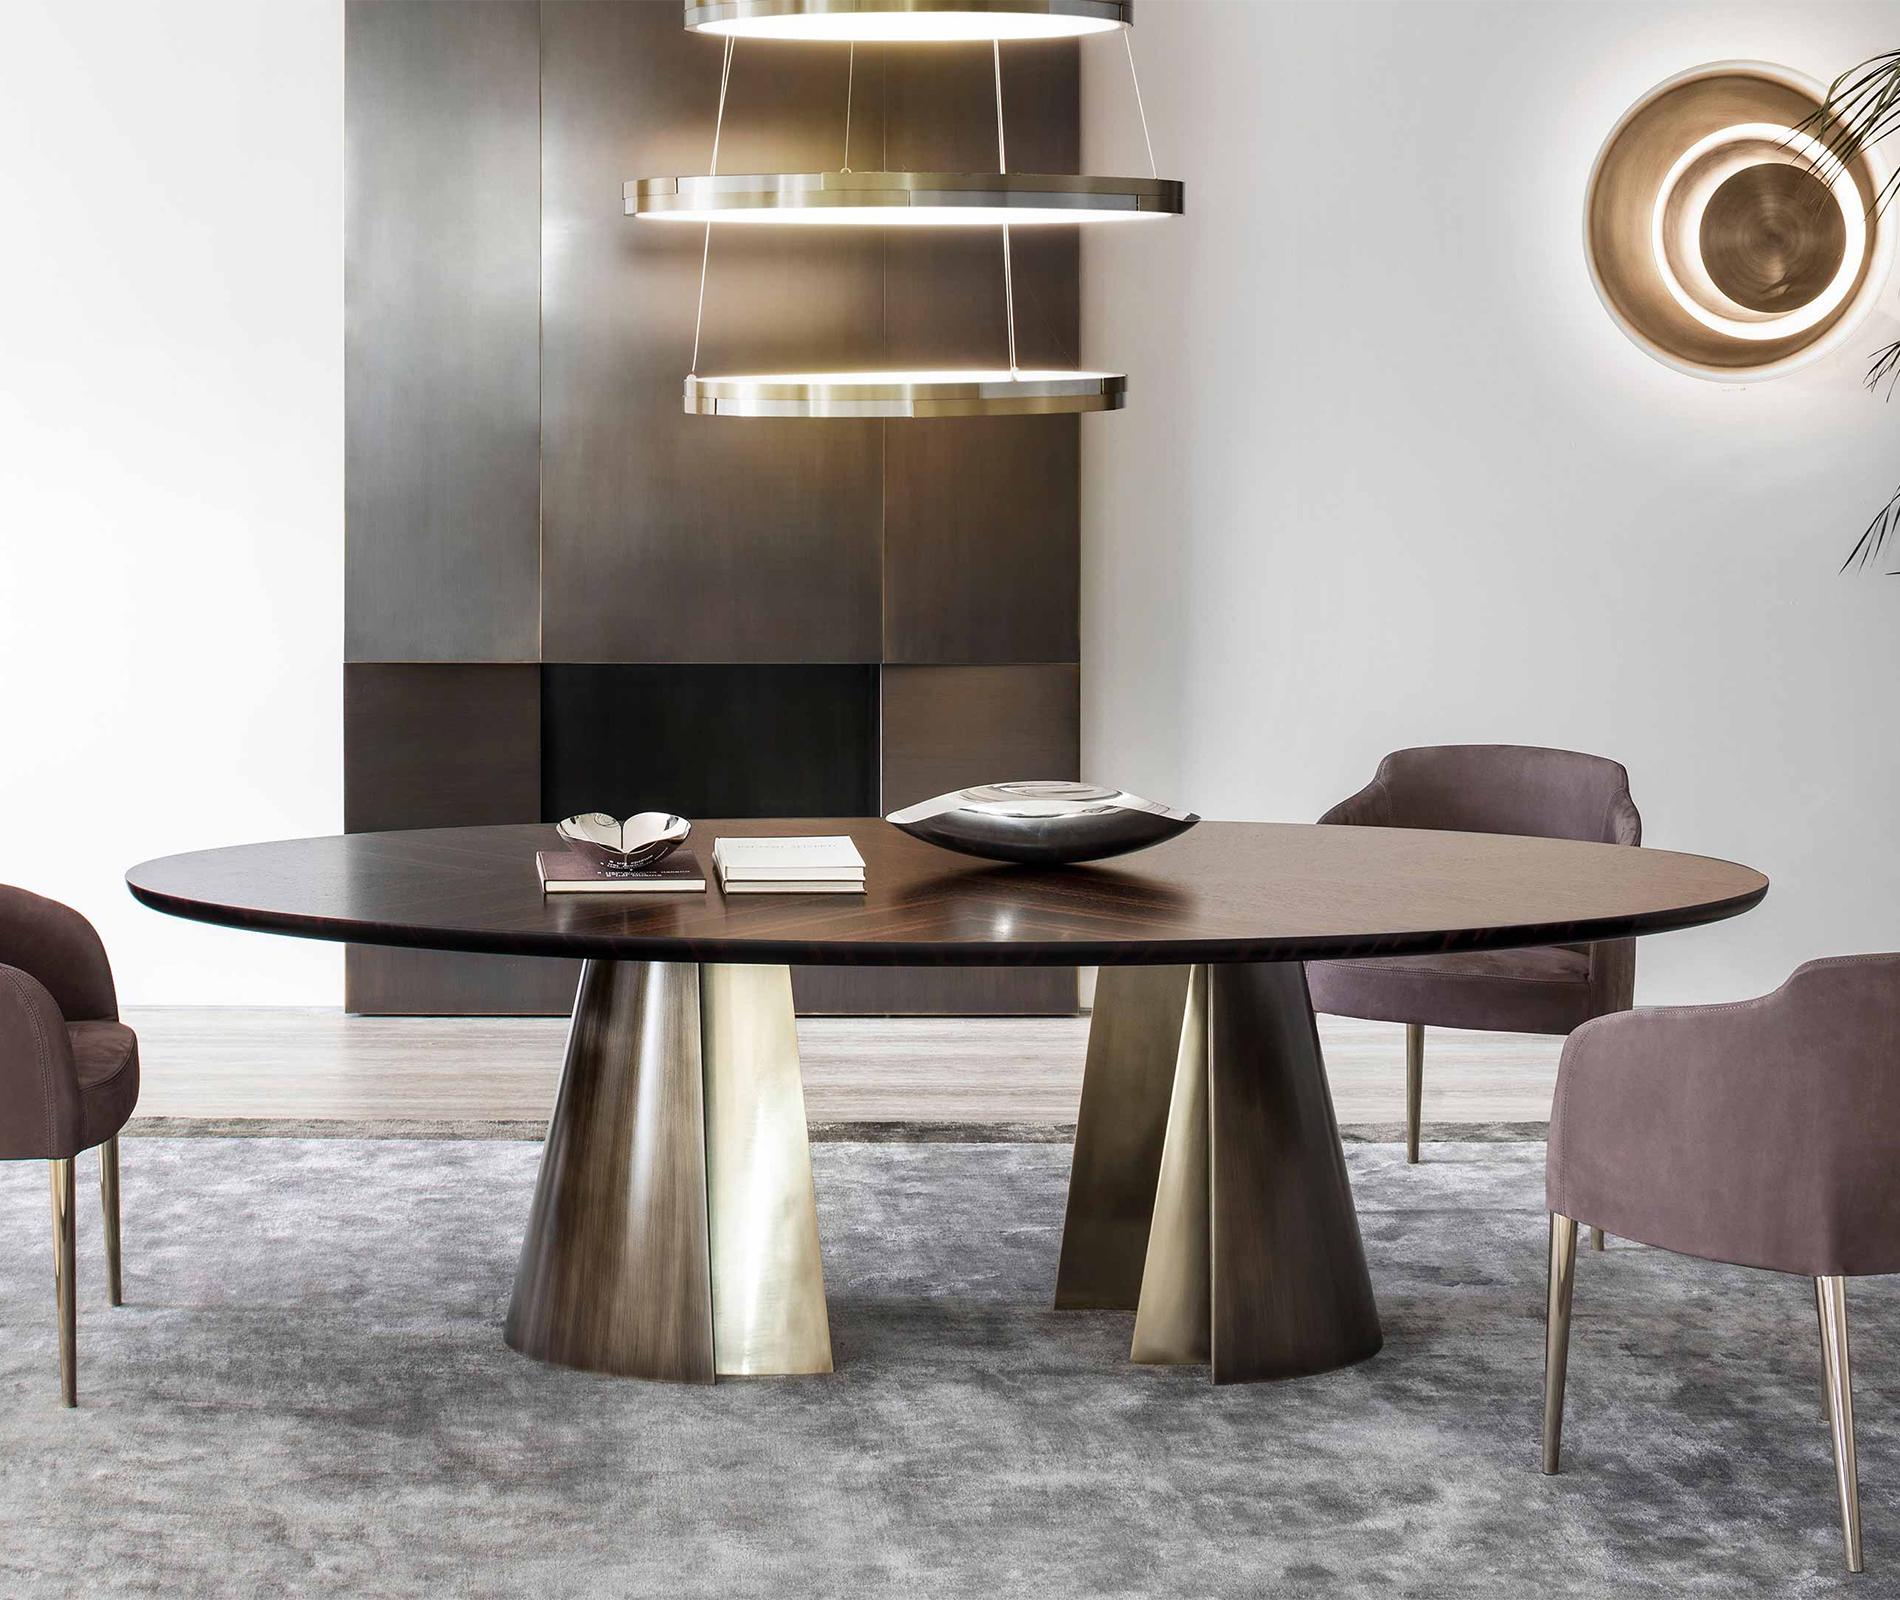 Dining table comet with solid ebony top
and with 2 bases in solid bronze in patinated varnished
finish and gold finish, price: 23500,00€.
Also available on request with black Sahara marble top,
Price: 39900,00€.
Also available on request with